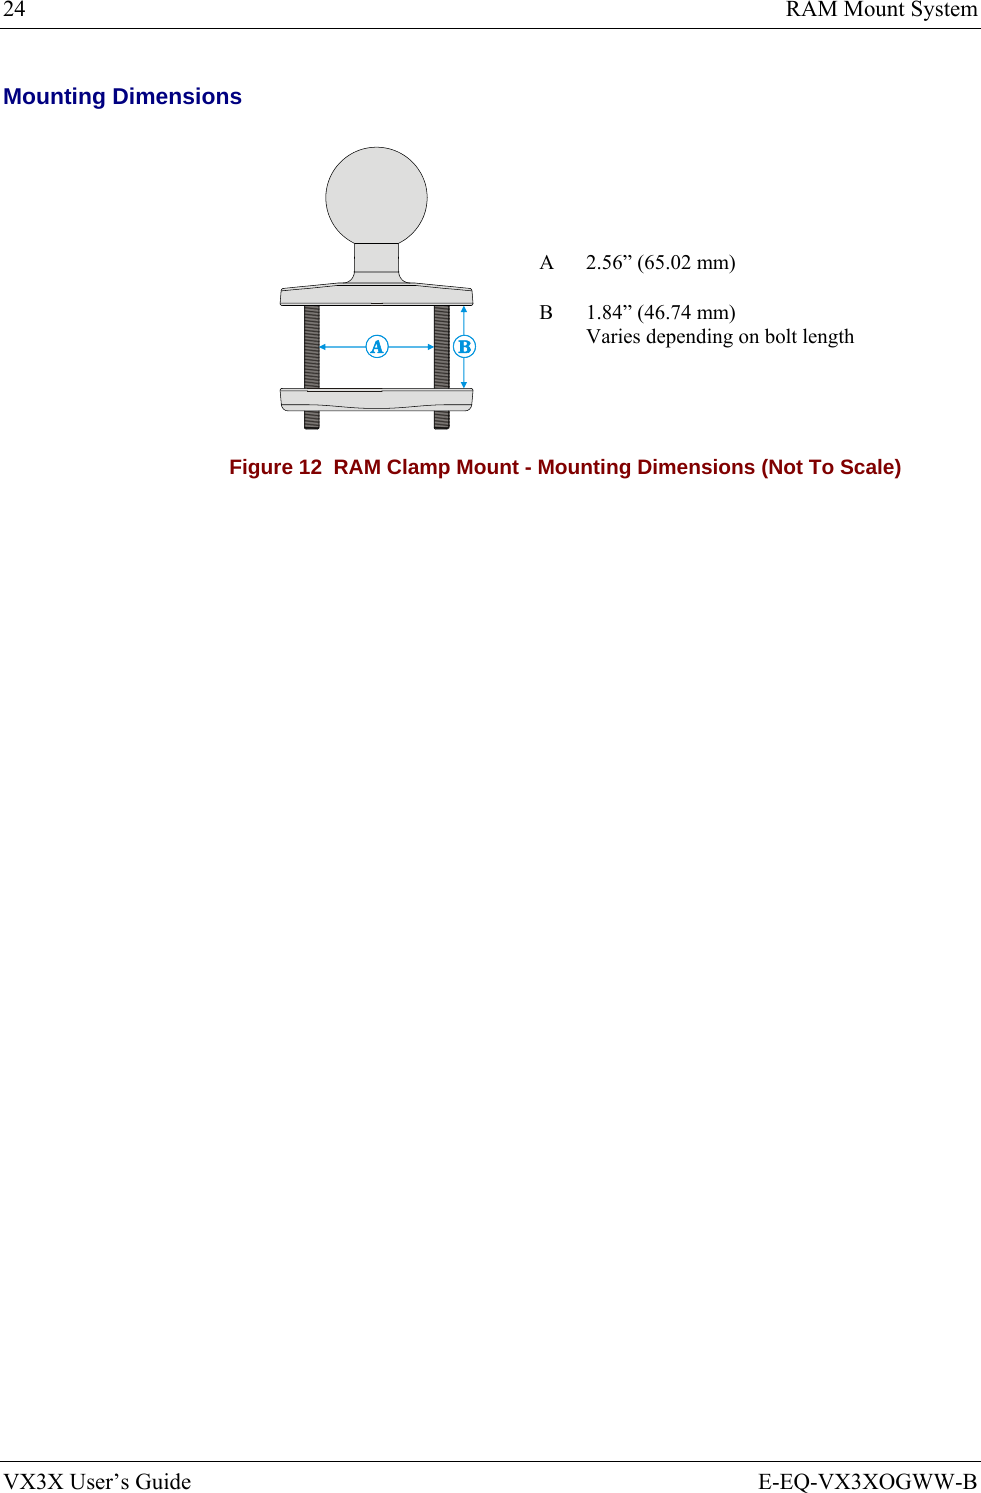 24  RAM Mount System VX3X User’s Guide  E-EQ-VX3XOGWW-B Mounting Dimensions A  2.56” (65.02 mm)  B  1.84” (46.74 mm) Varies depending on bolt length Figure 12  RAM Clamp Mount - Mounting Dimensions (Not To Scale) 